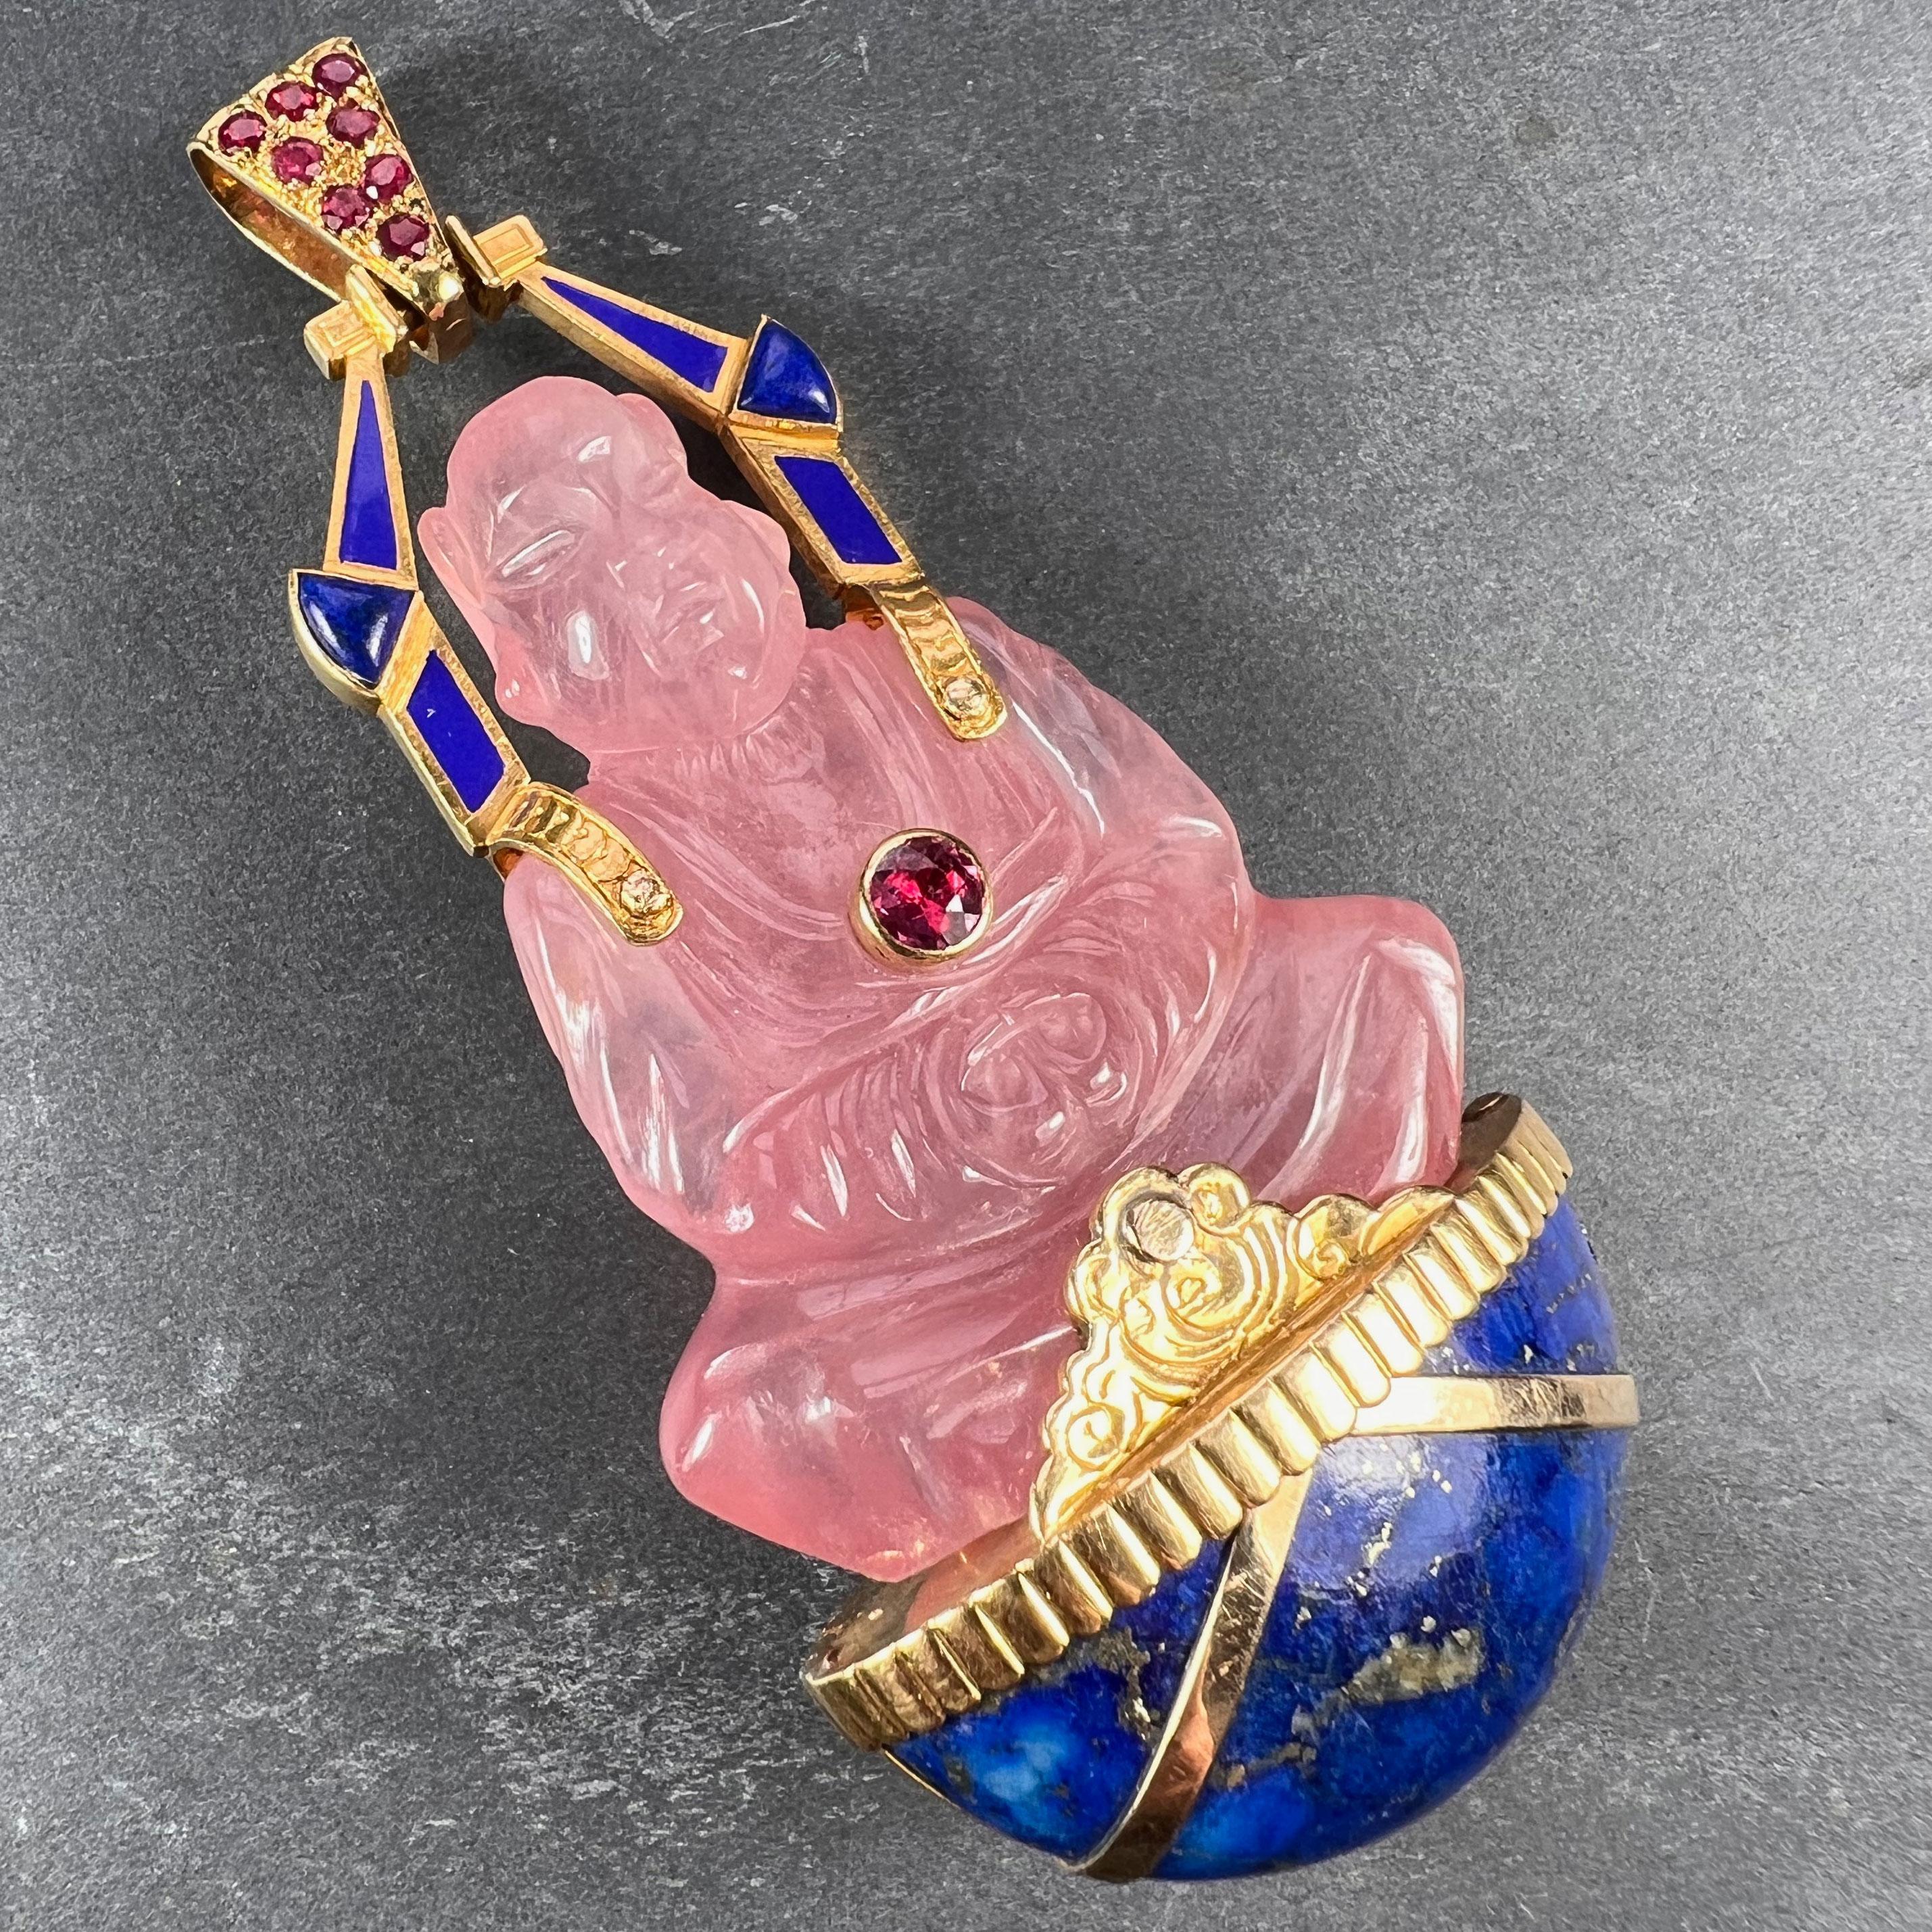 A large French 18 karat (18K) yellow gold pendant designed as a carved rose quartz Buddha sitting in prayer on a cabochon of lapis lazuli, set with rubies to the pendant bail and chest. Stamped with the eagle's head for French manufacture and 18